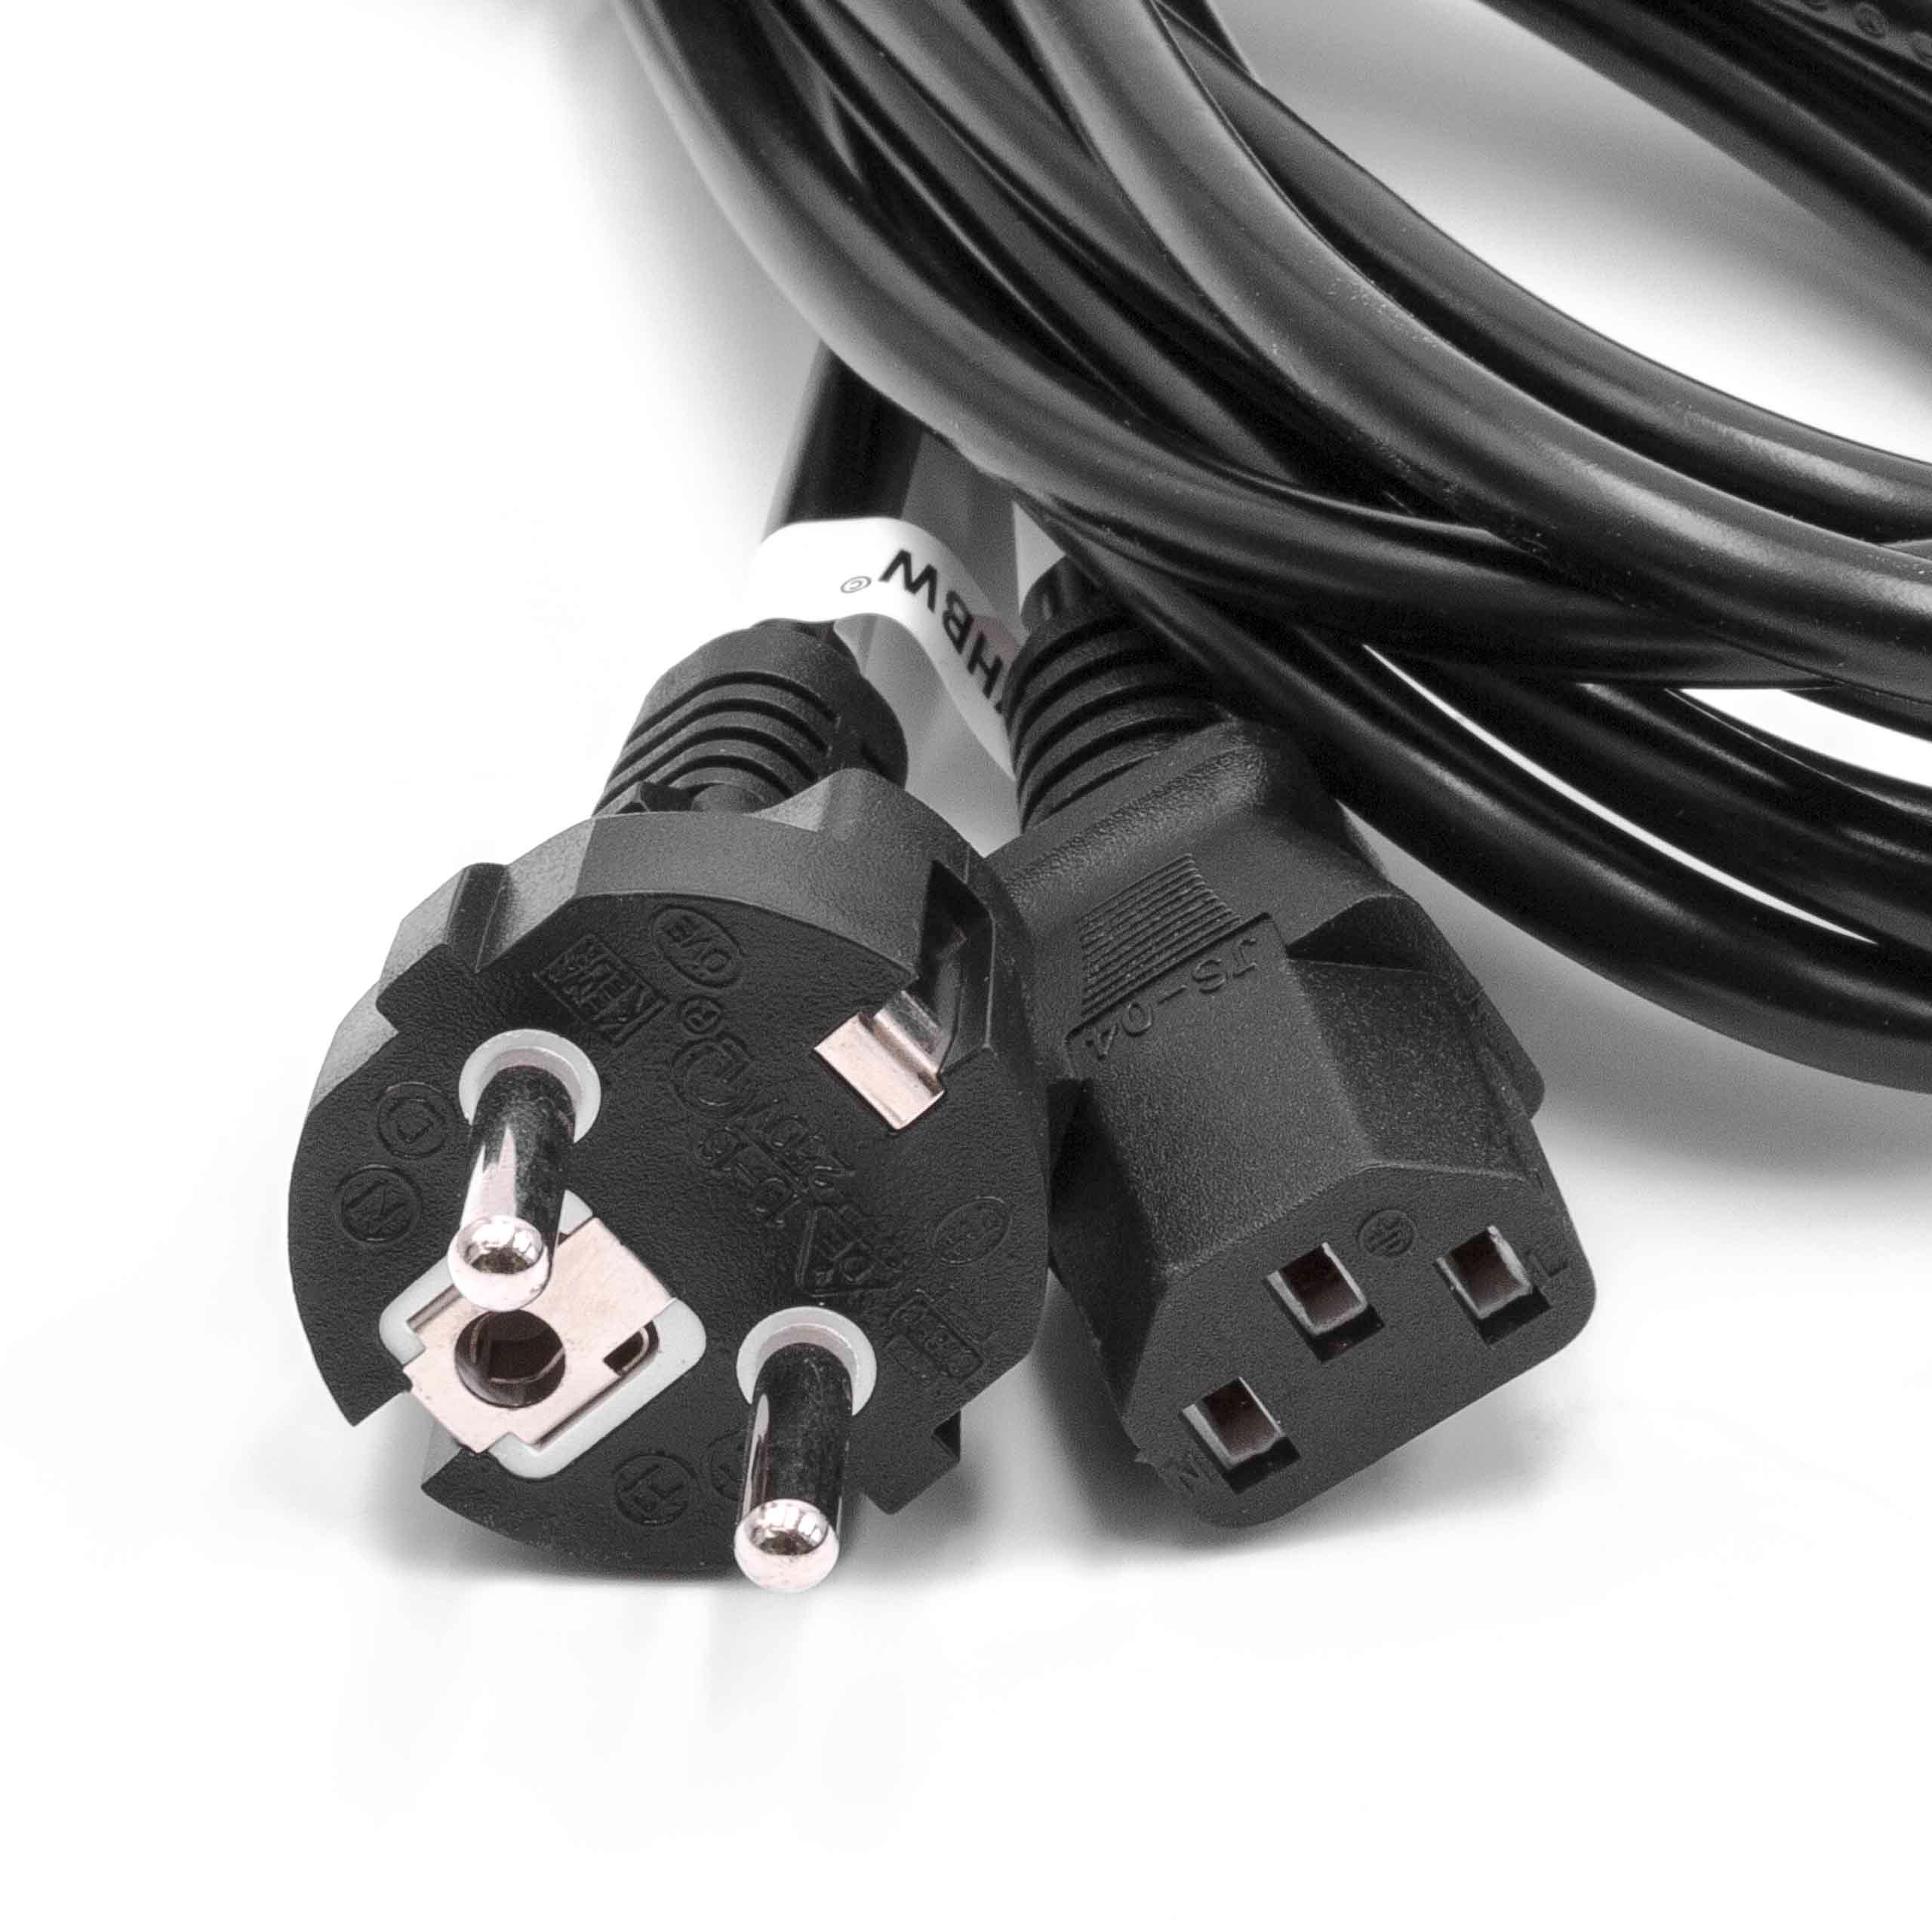 C13 Power Cable Euro Plug suitable for Devices e.g. PC Monitor Computer - 5 m